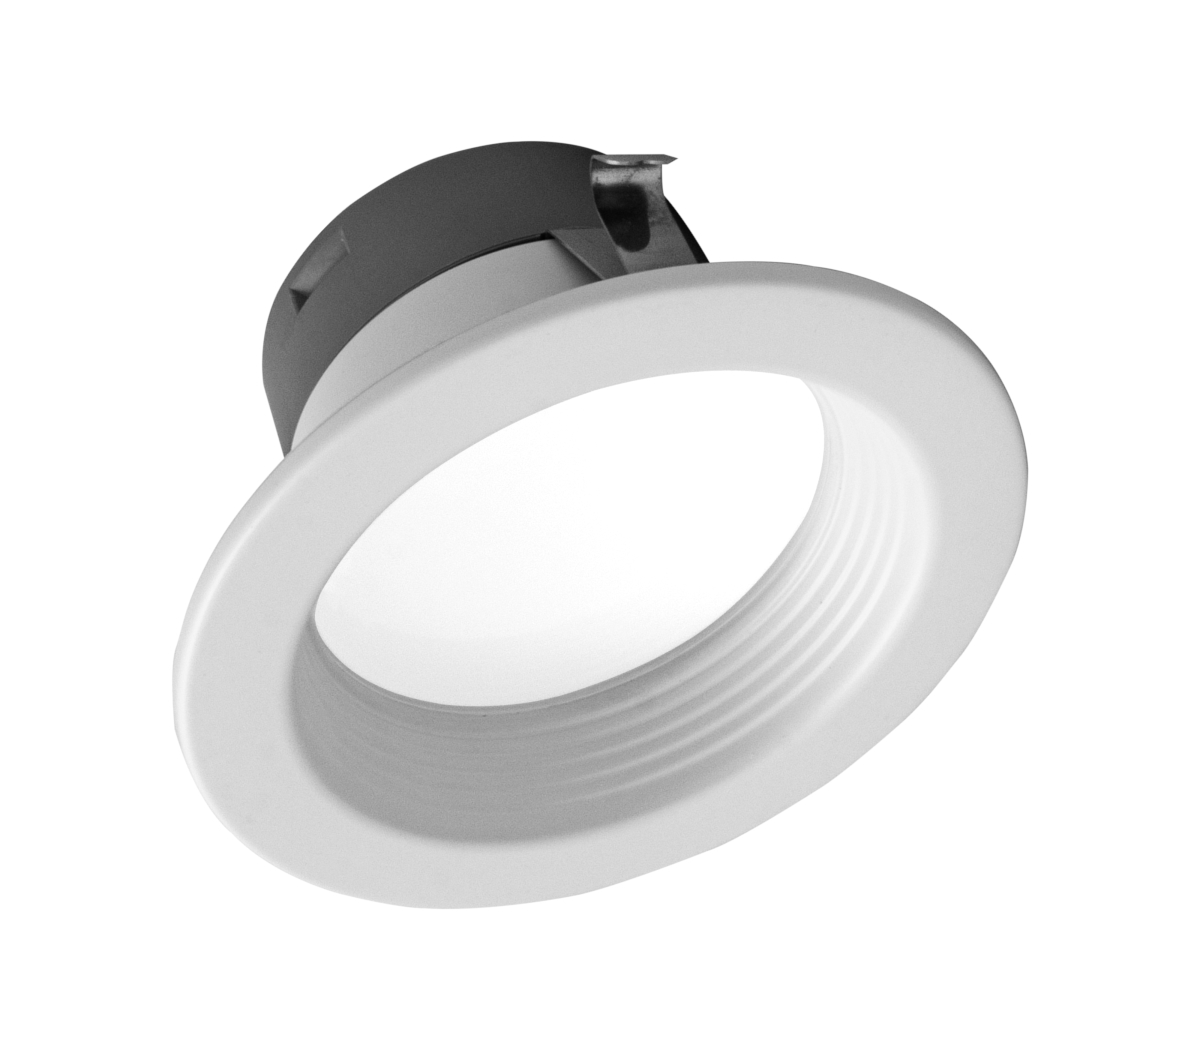 Picture of NICOR Lighting DLR4607120SWHBF DLR4(v6) 4-inch White Selectable Recessed LED Downlight with Baffle